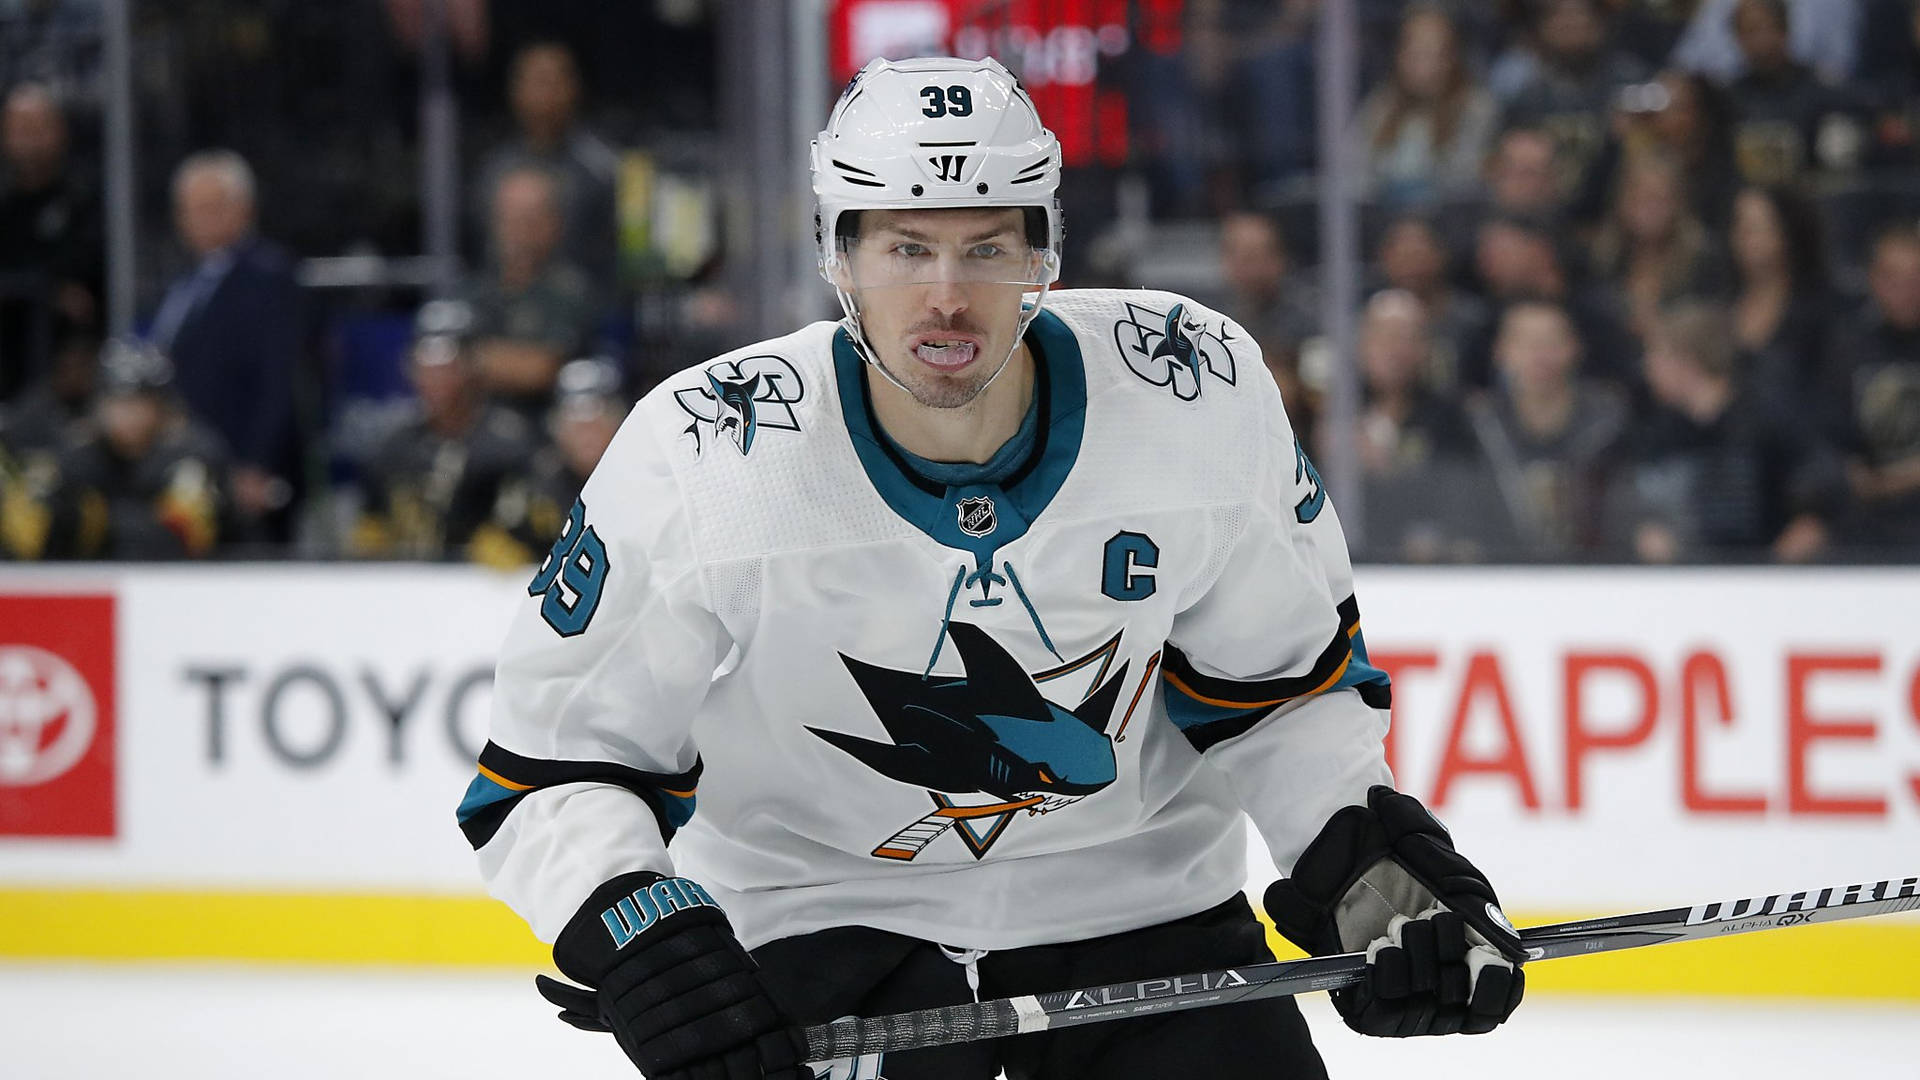 Canadian Professional Ice Hockey Player Logan Couture Wallpaper